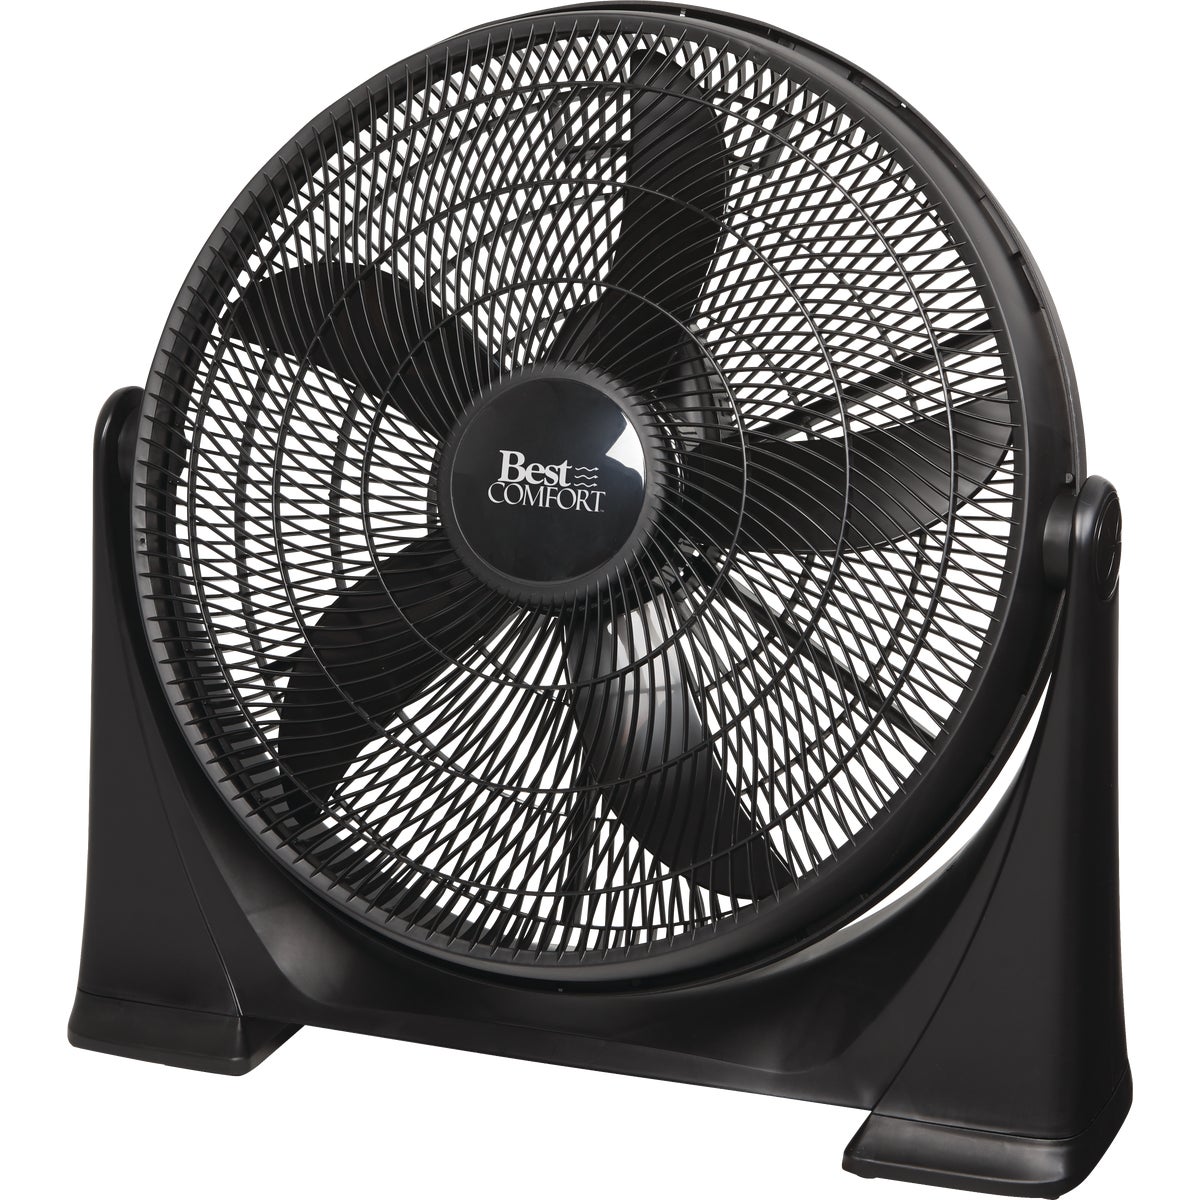 Item 502400, 20-inch air circulator. Creates large airflow for any space.